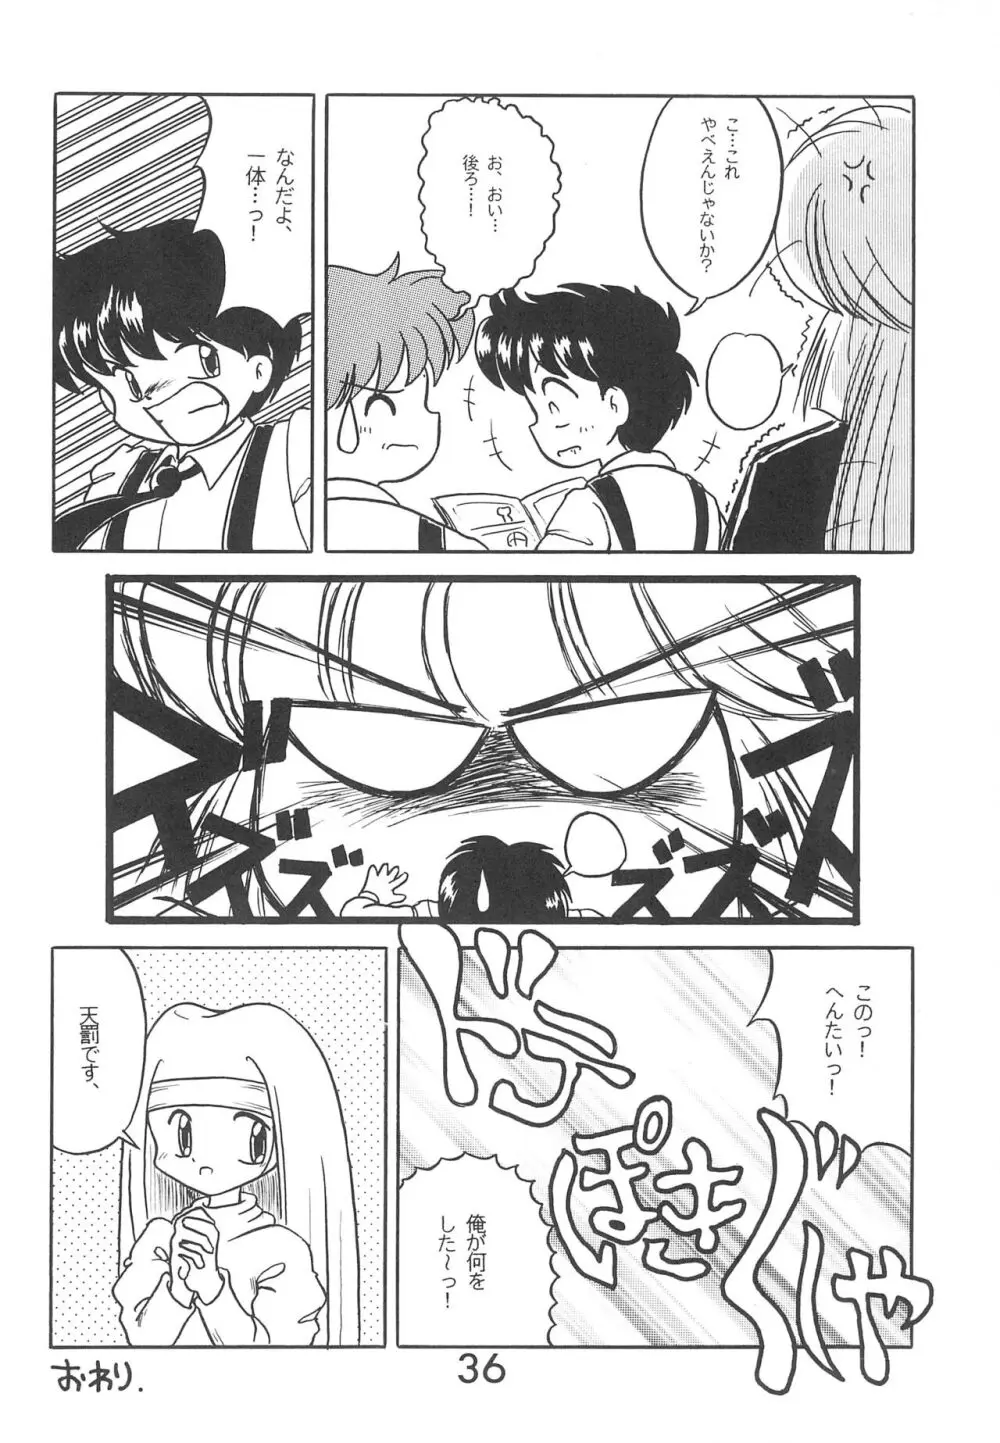 Fun House 9th Chame! - page36